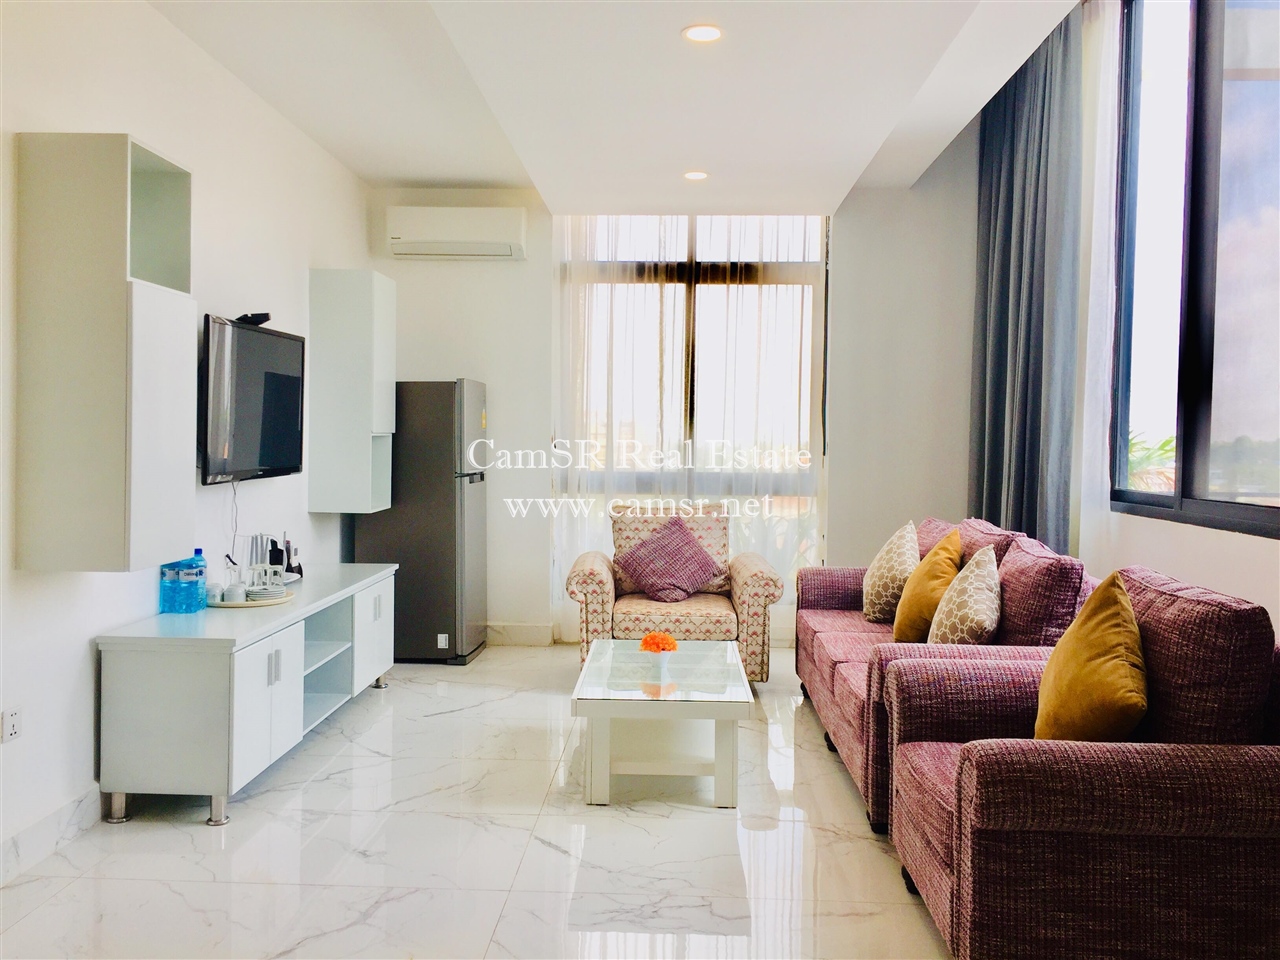 Service Apartment for Rent in Siem Reap – Svay Dangkum